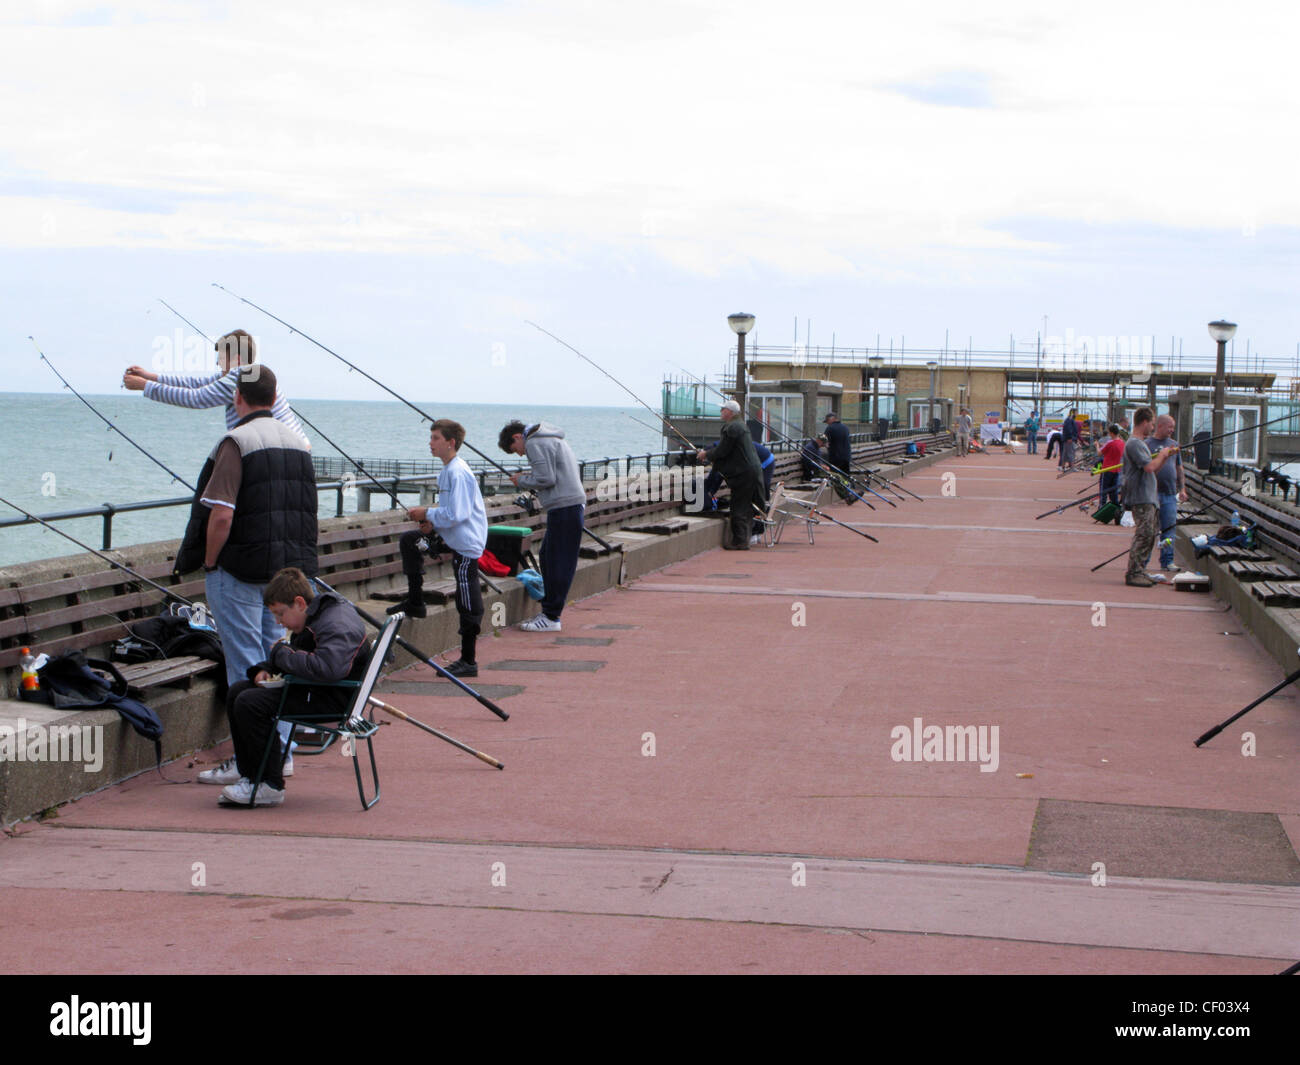 https://c8.alamy.com/comp/CF03X4/people-fishing-on-the-pier-at-deal-in-kent-CF03X4.jpg